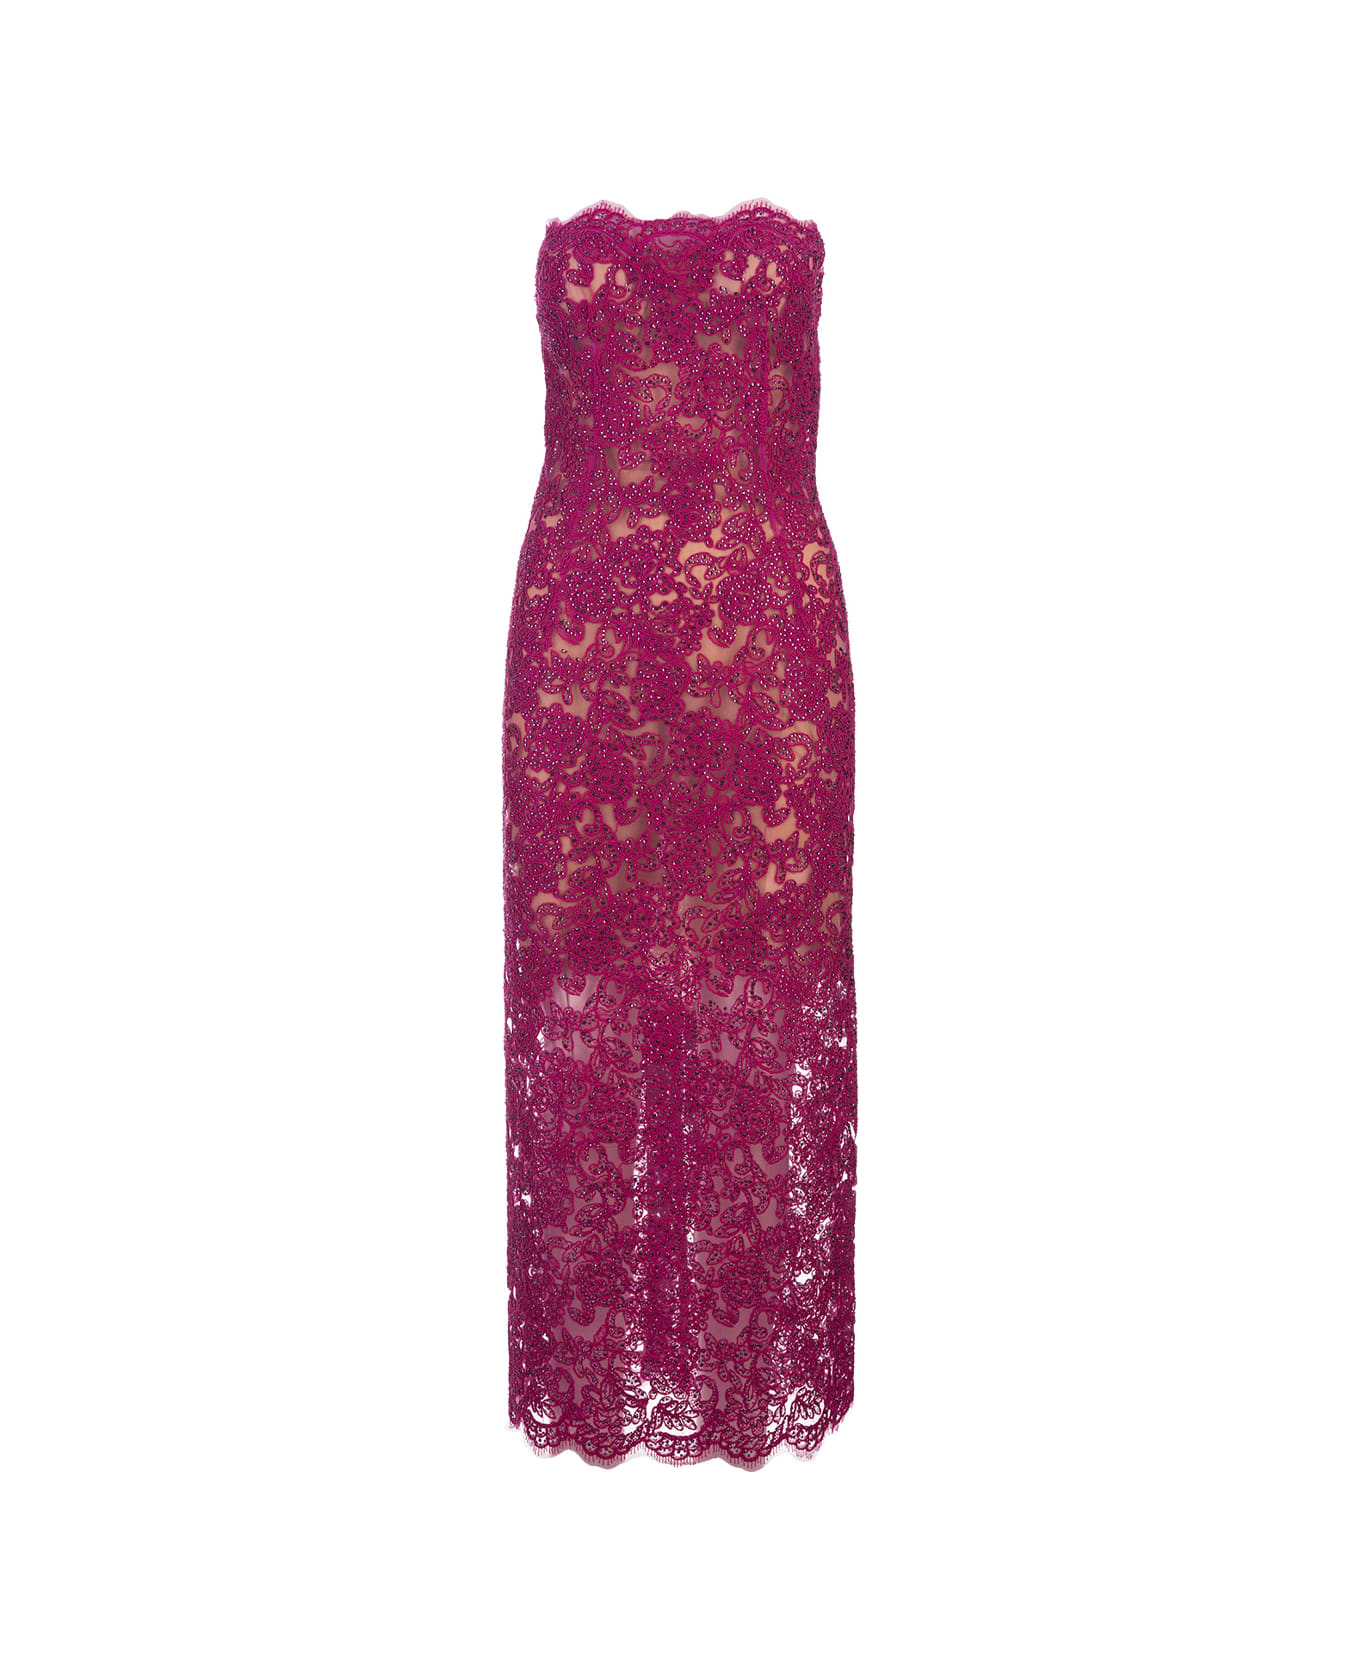 Ermanno Scervino Fuchsia Lace Longuette Dress With Micro Crystals - Pink